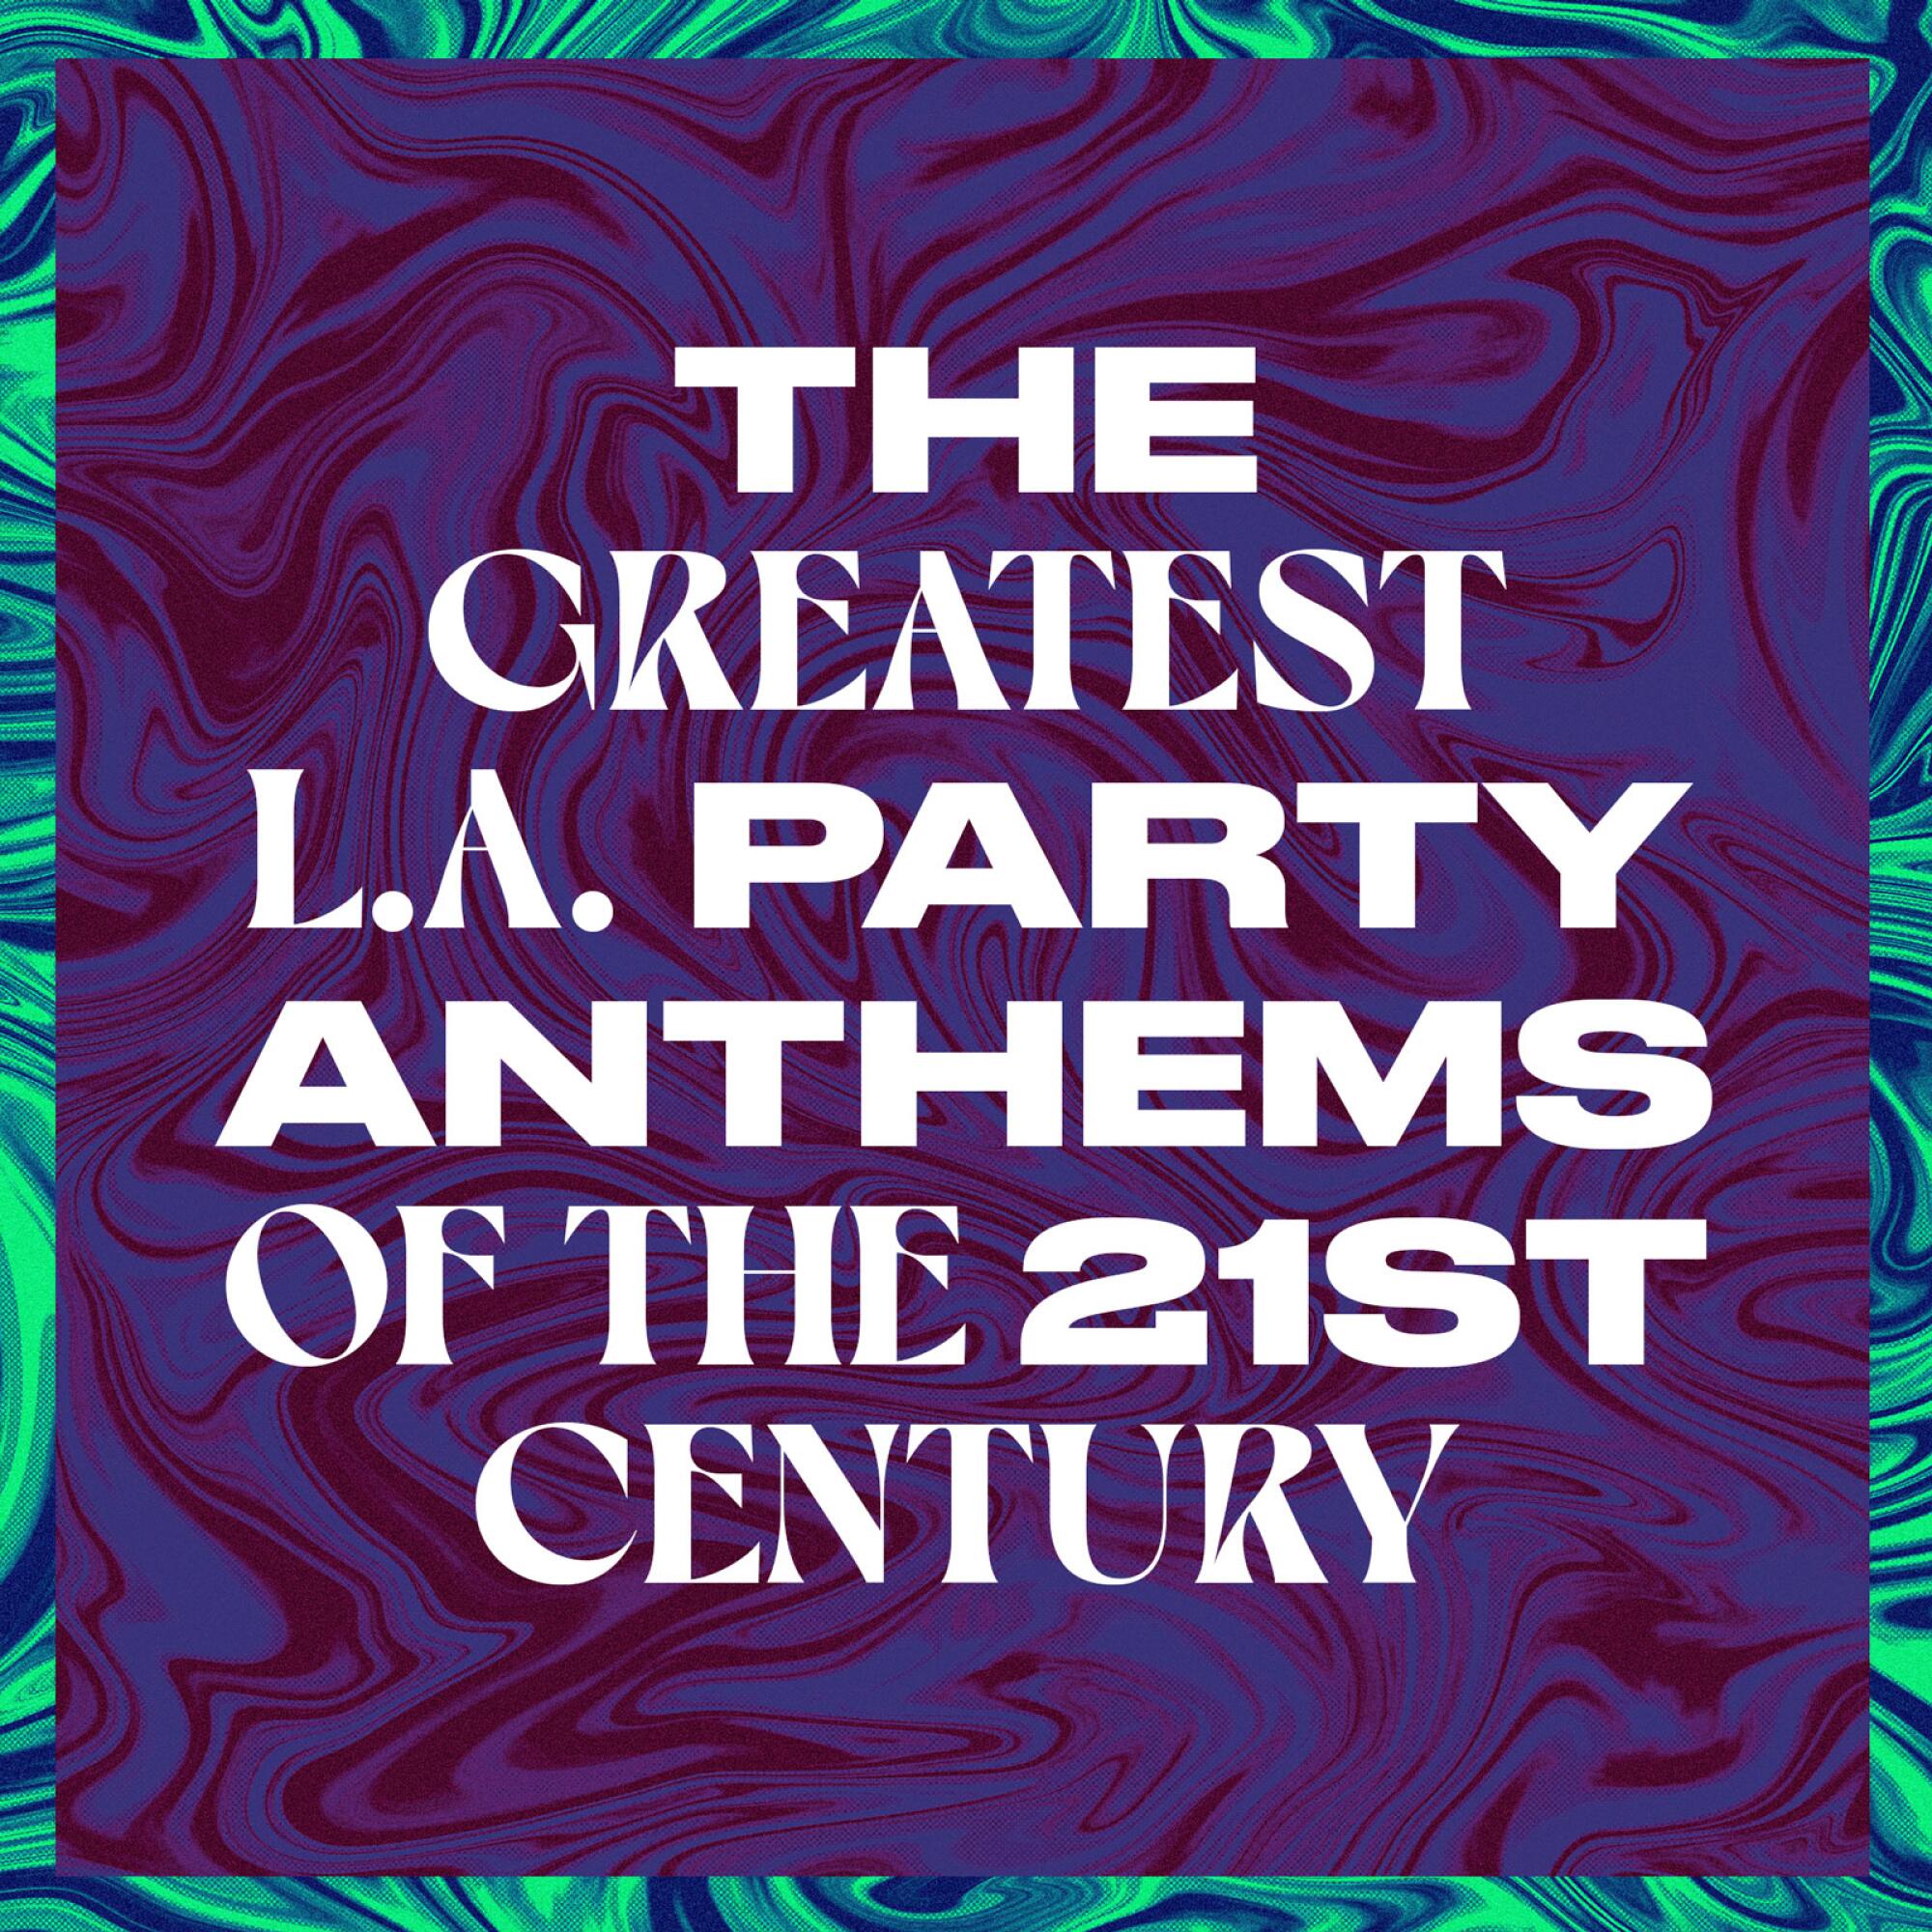 the greatest L..A. party anthems of the 21st century